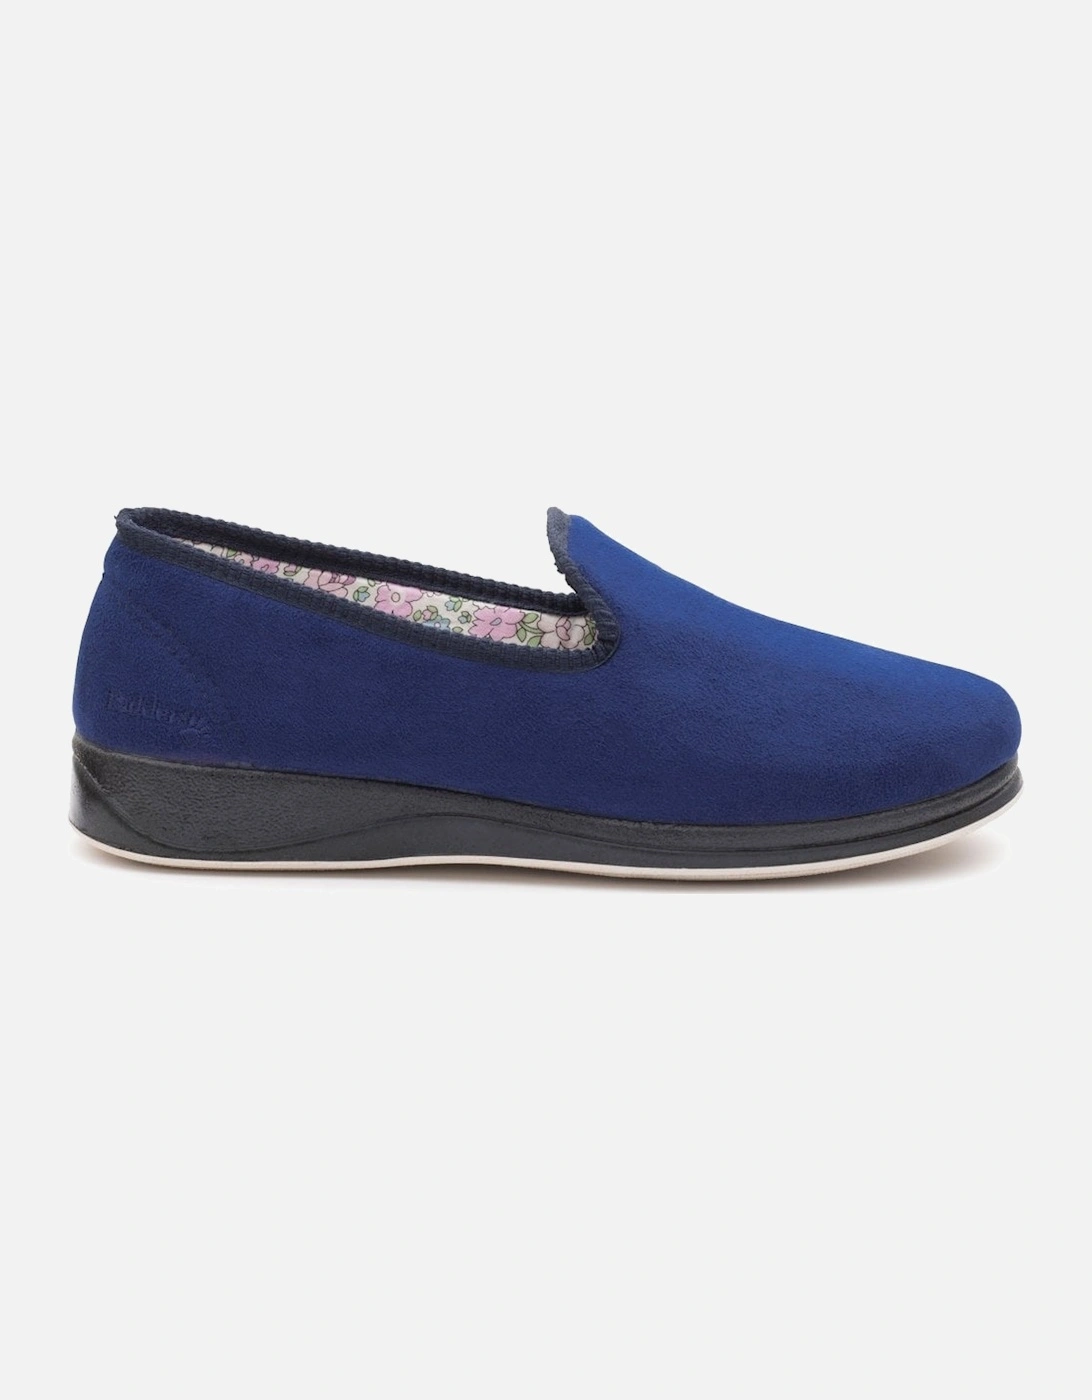 Repose Womens Fully Lined Slippers